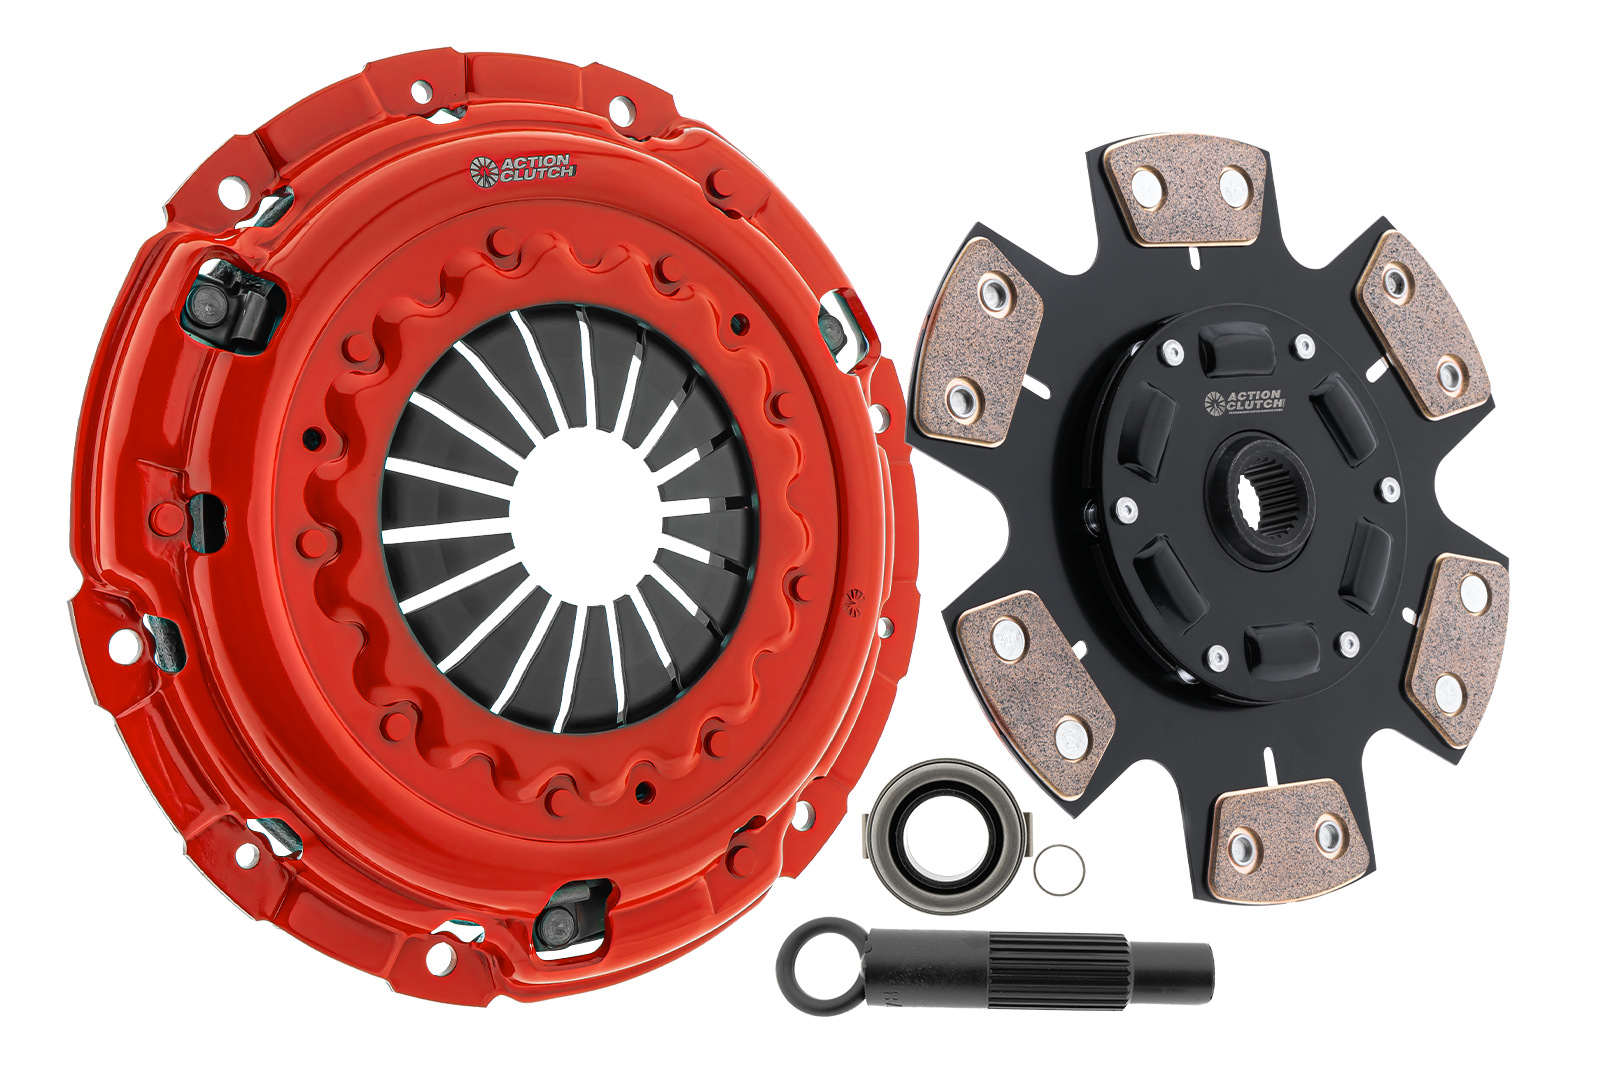 Stage 5 Clutch Kit (2MS) for Infiniti G37 2008-2013 3.7L (VQ37VHR) Includes Heavy Duty Concentric Slave Bearing